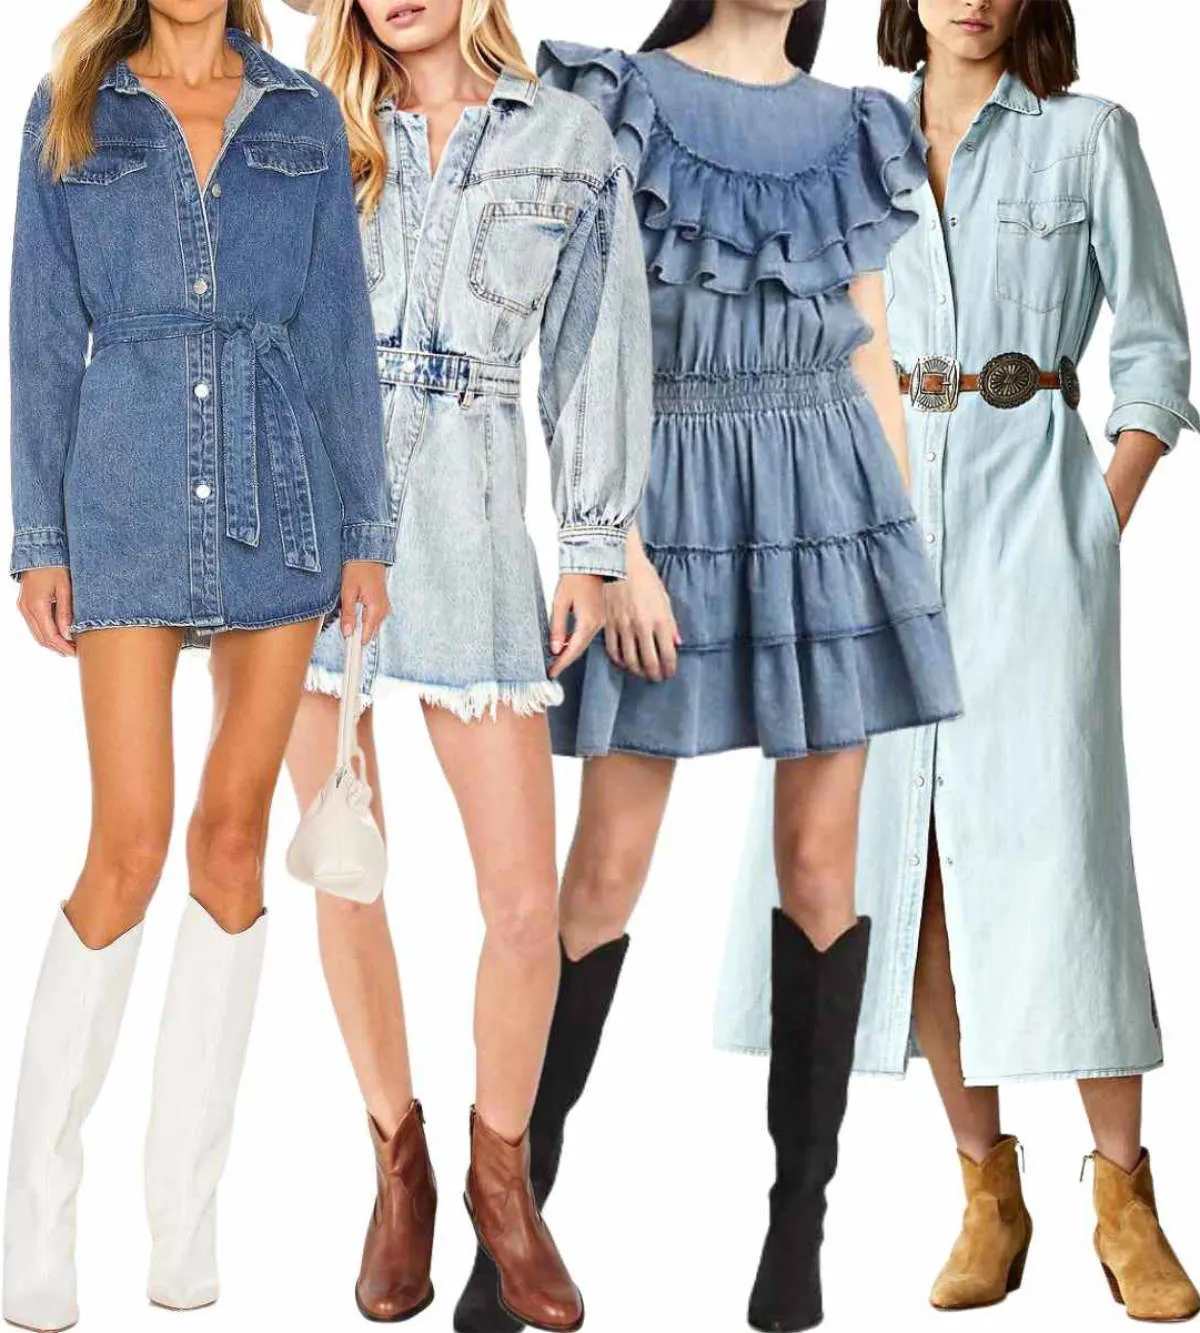 Collage of 4 women wearing different denim dresses with cowboy boots.